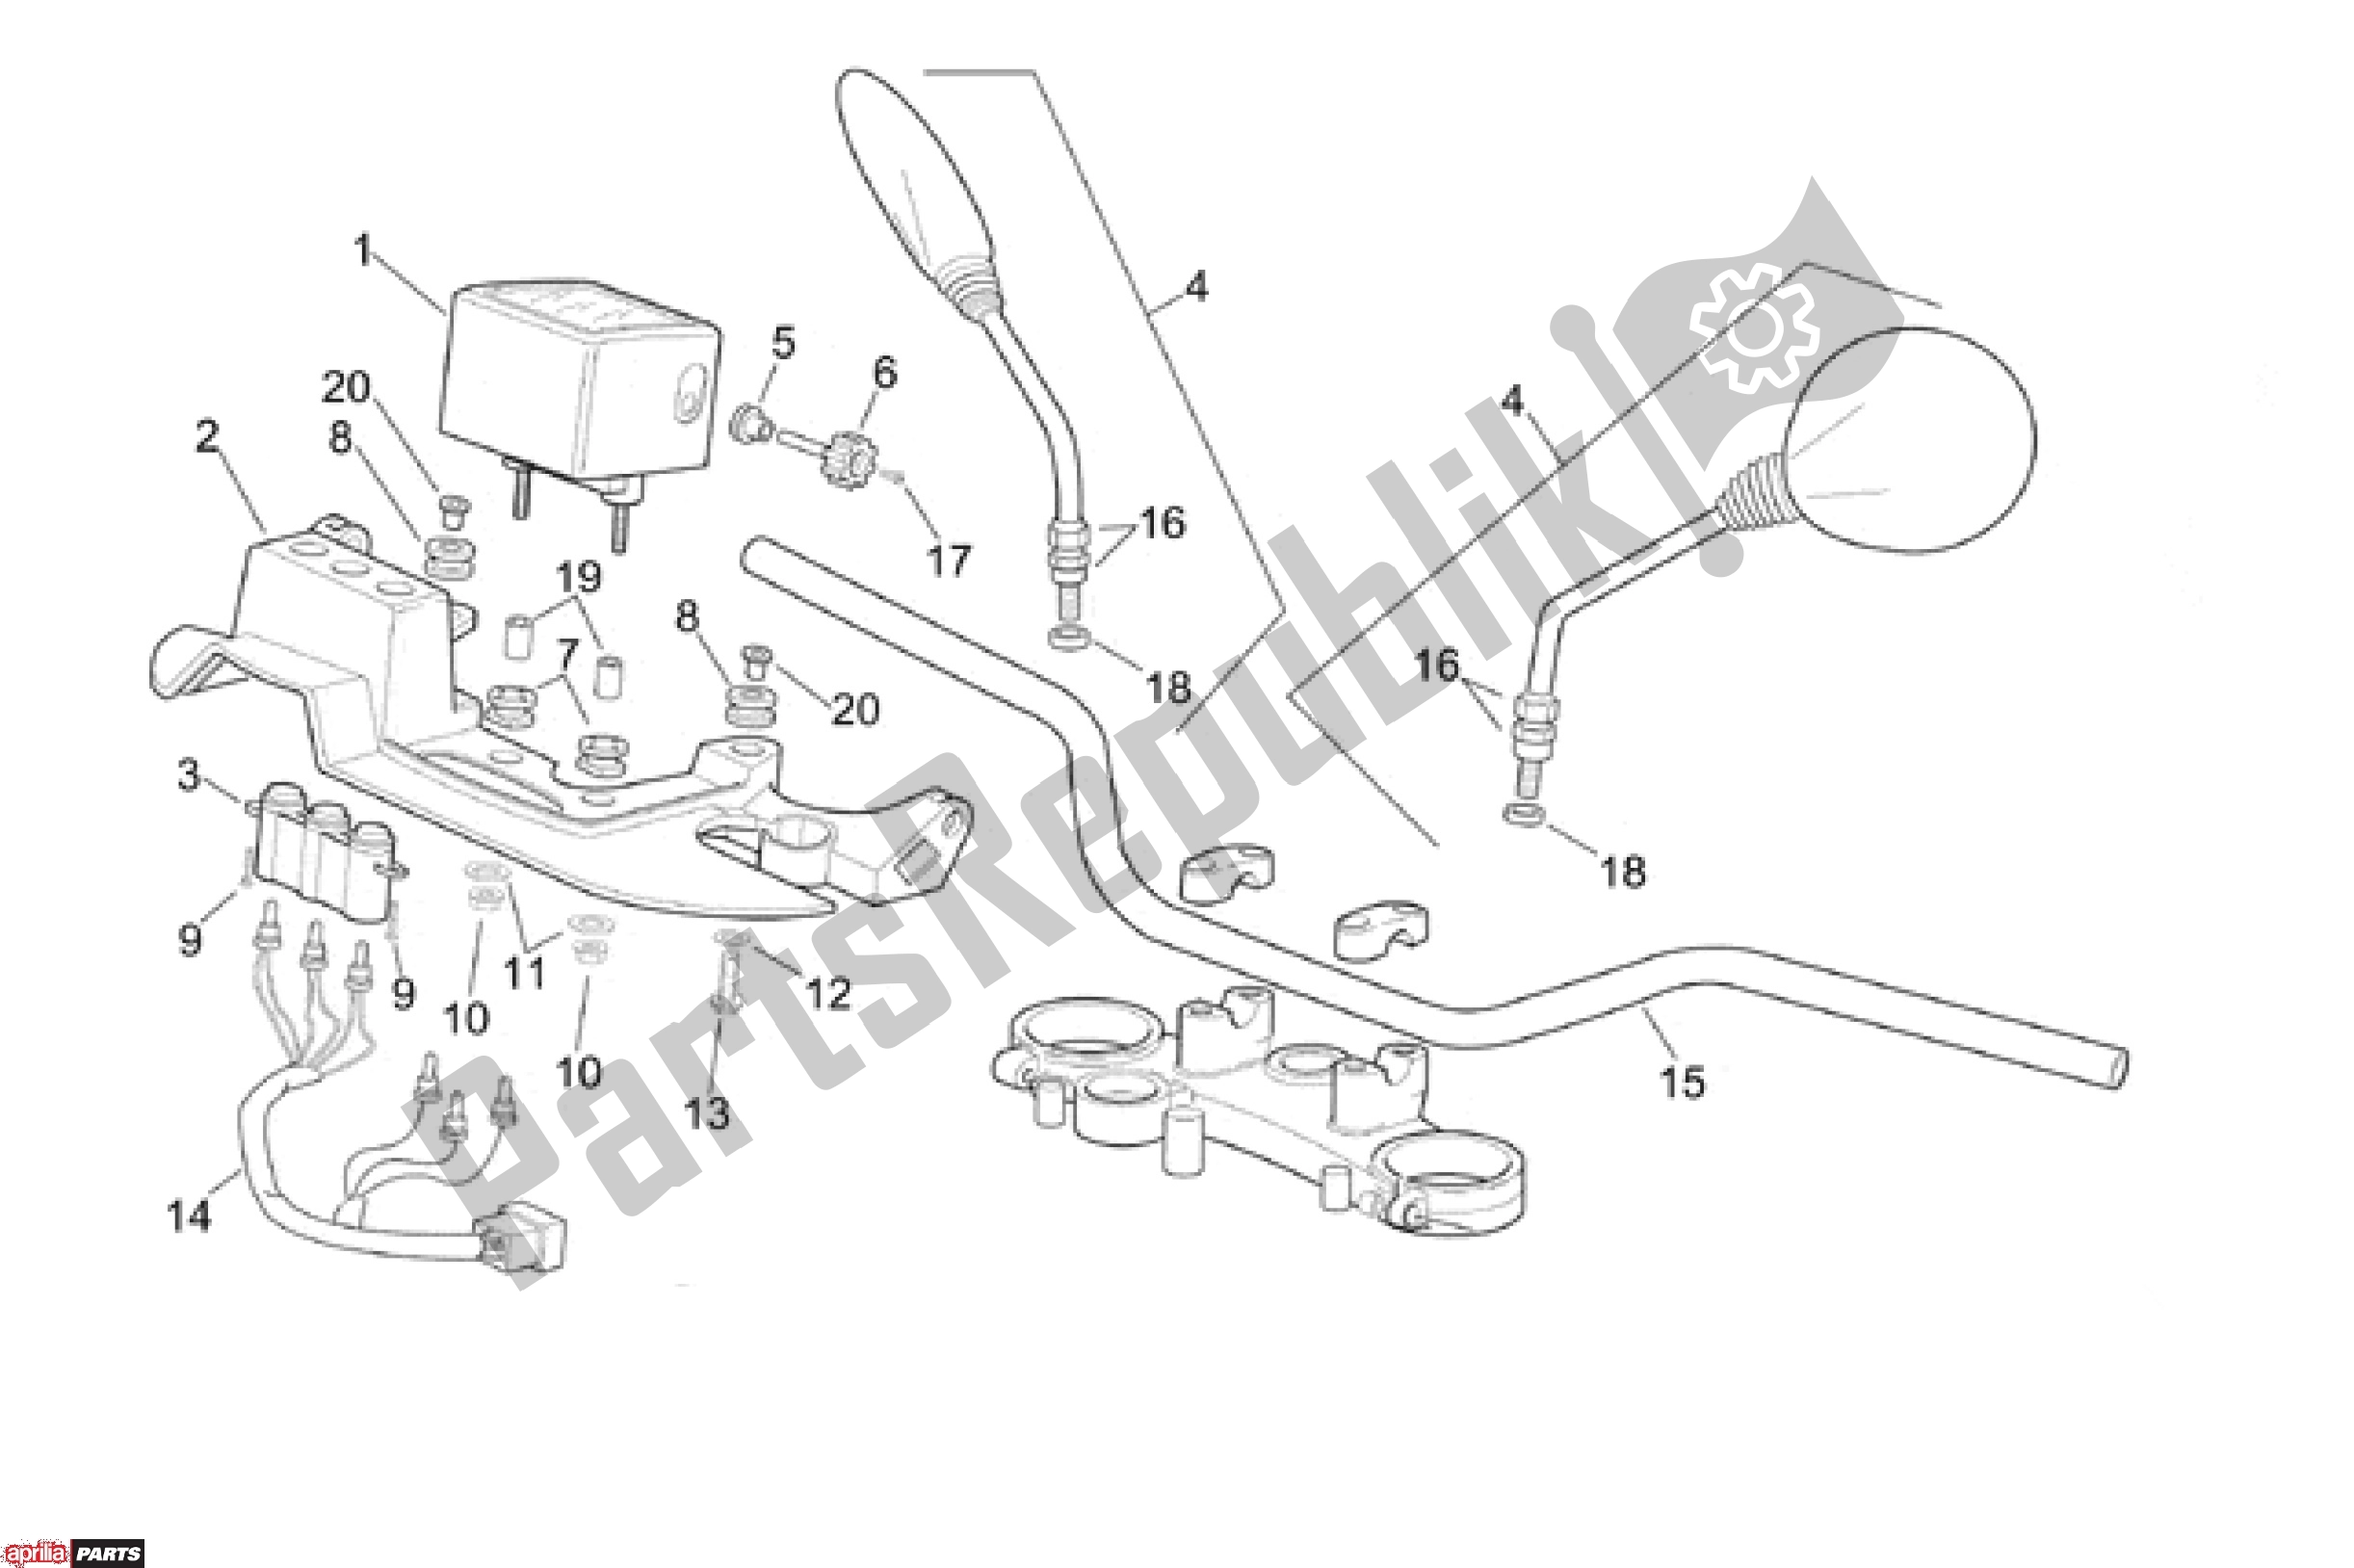 All parts for the Handlebar of the Aprilia ETX / RX 108 125 1999 - 2001